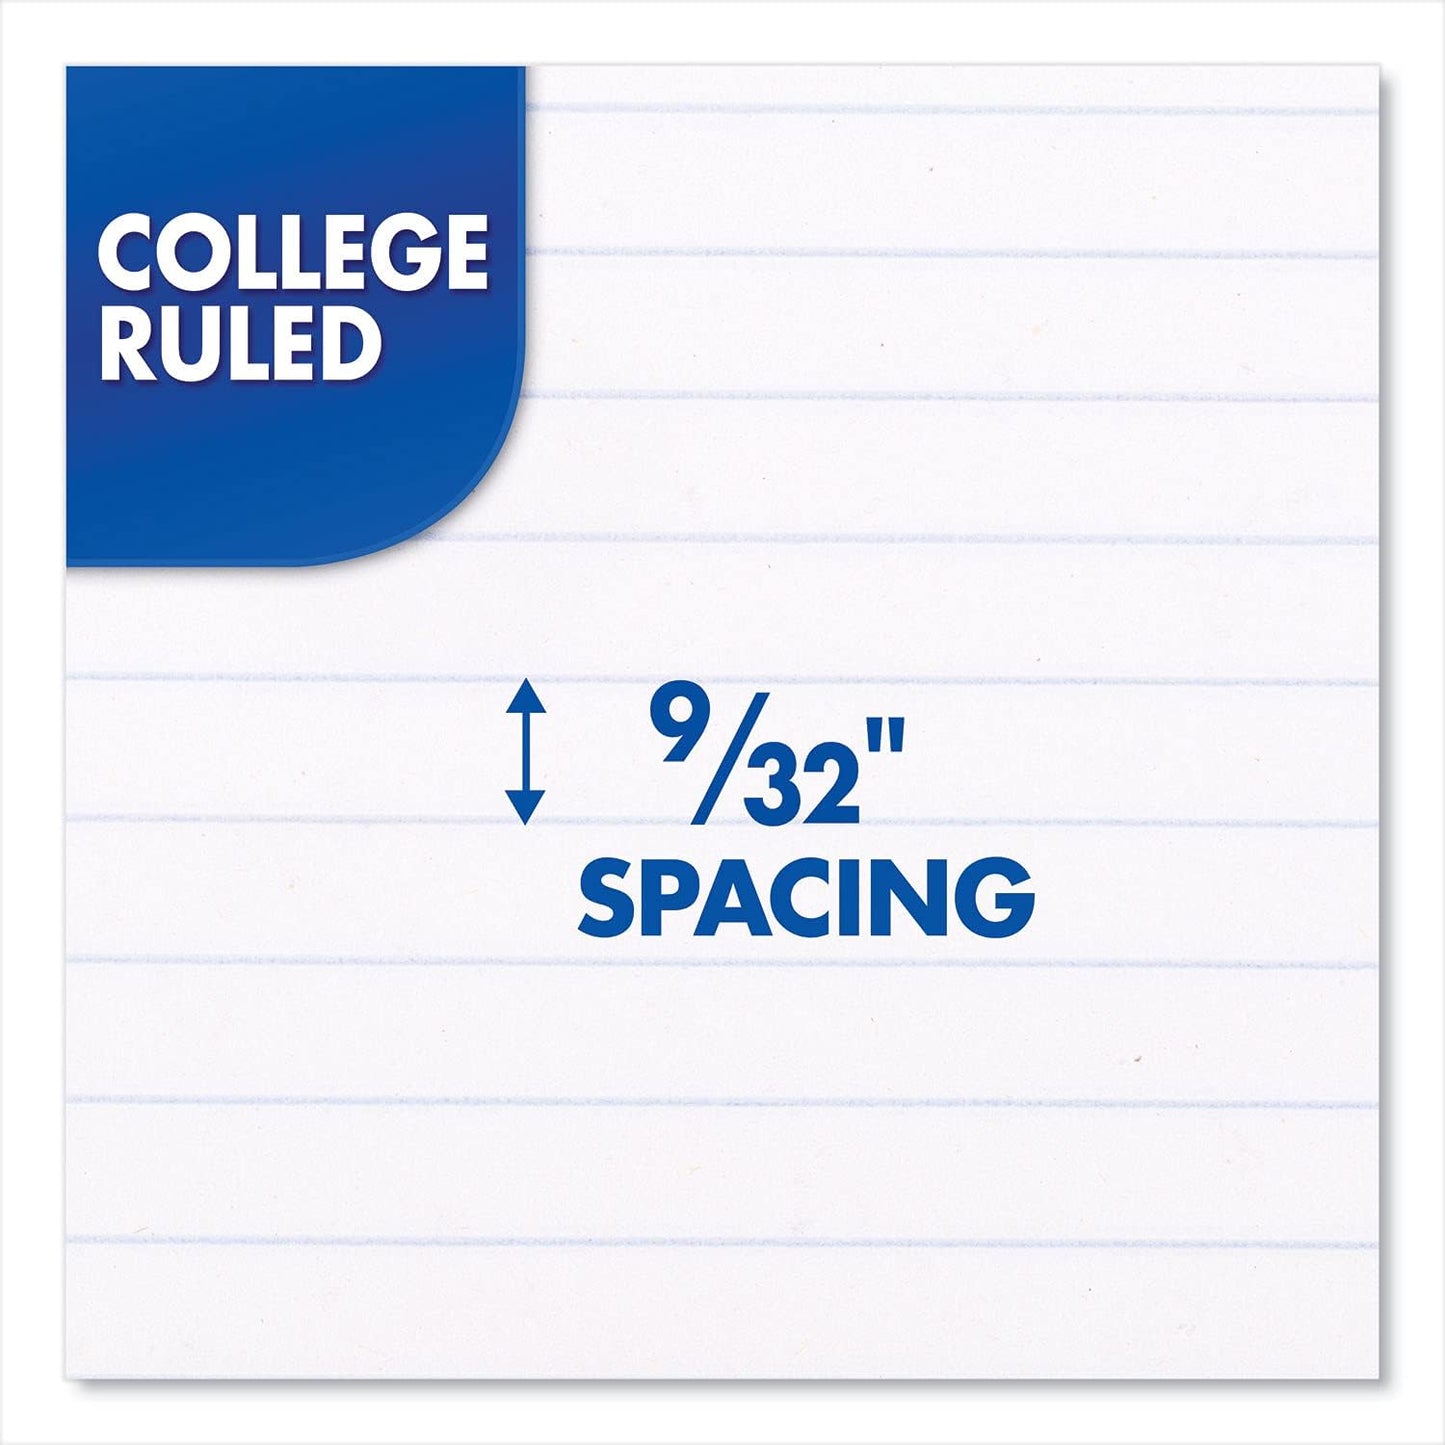 Spiral Notebooks, 6 Pack, 1 Subject, College Ruled Paper, 7-1/2" X 10-1/2", 70 Sheets per Notebook, Color Will Vary (73065)